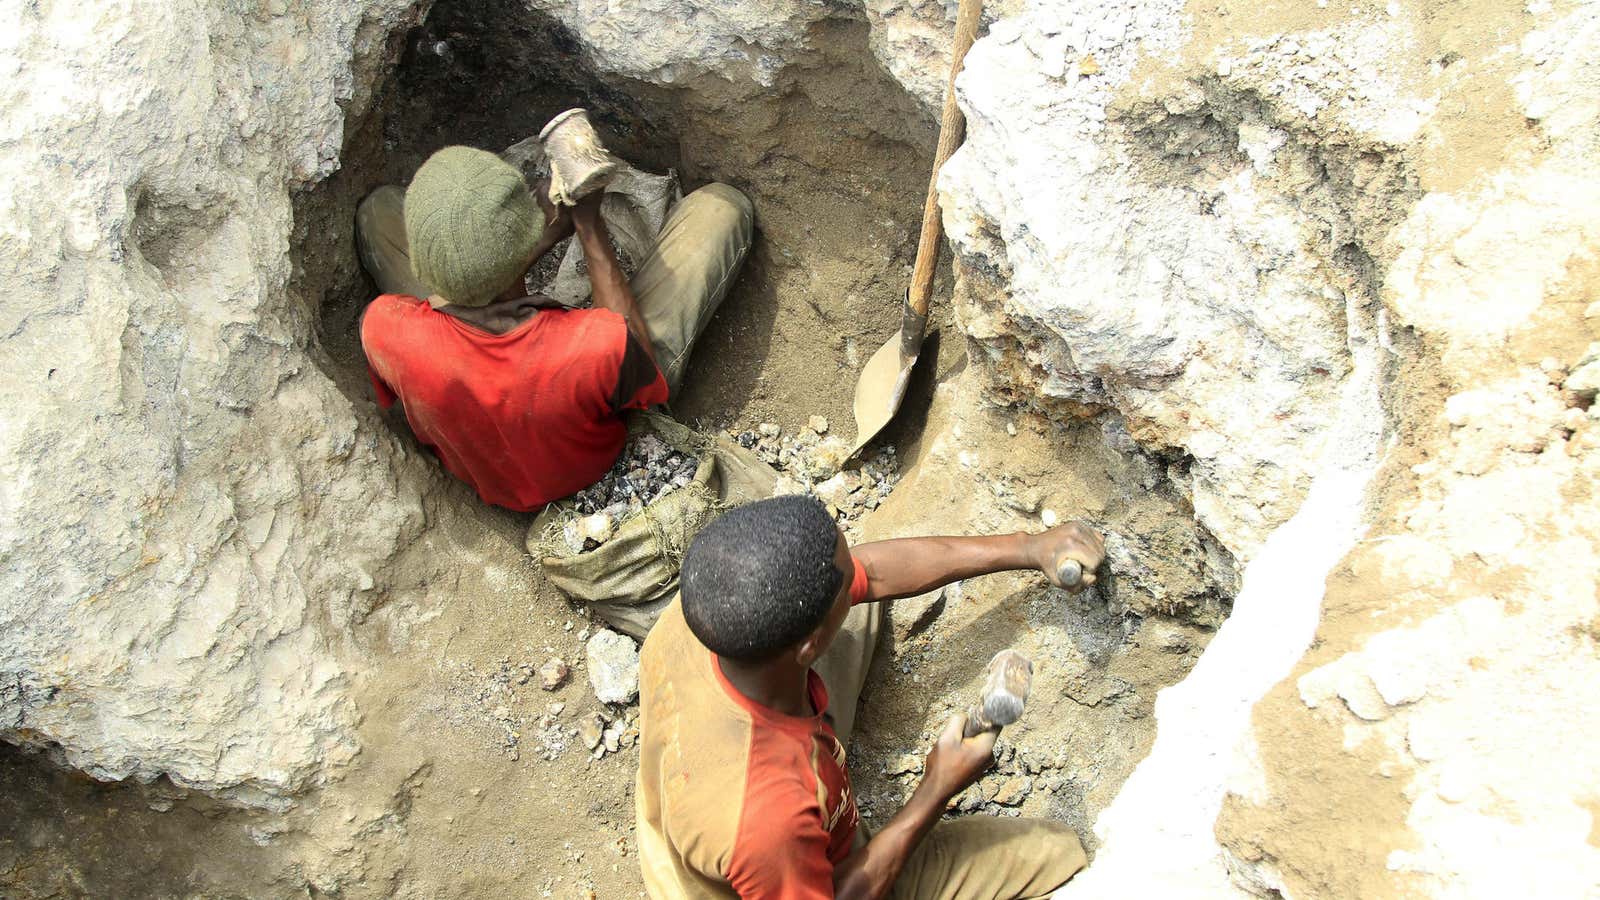 Cobalt miners in southern Democratic Republic of Congo.